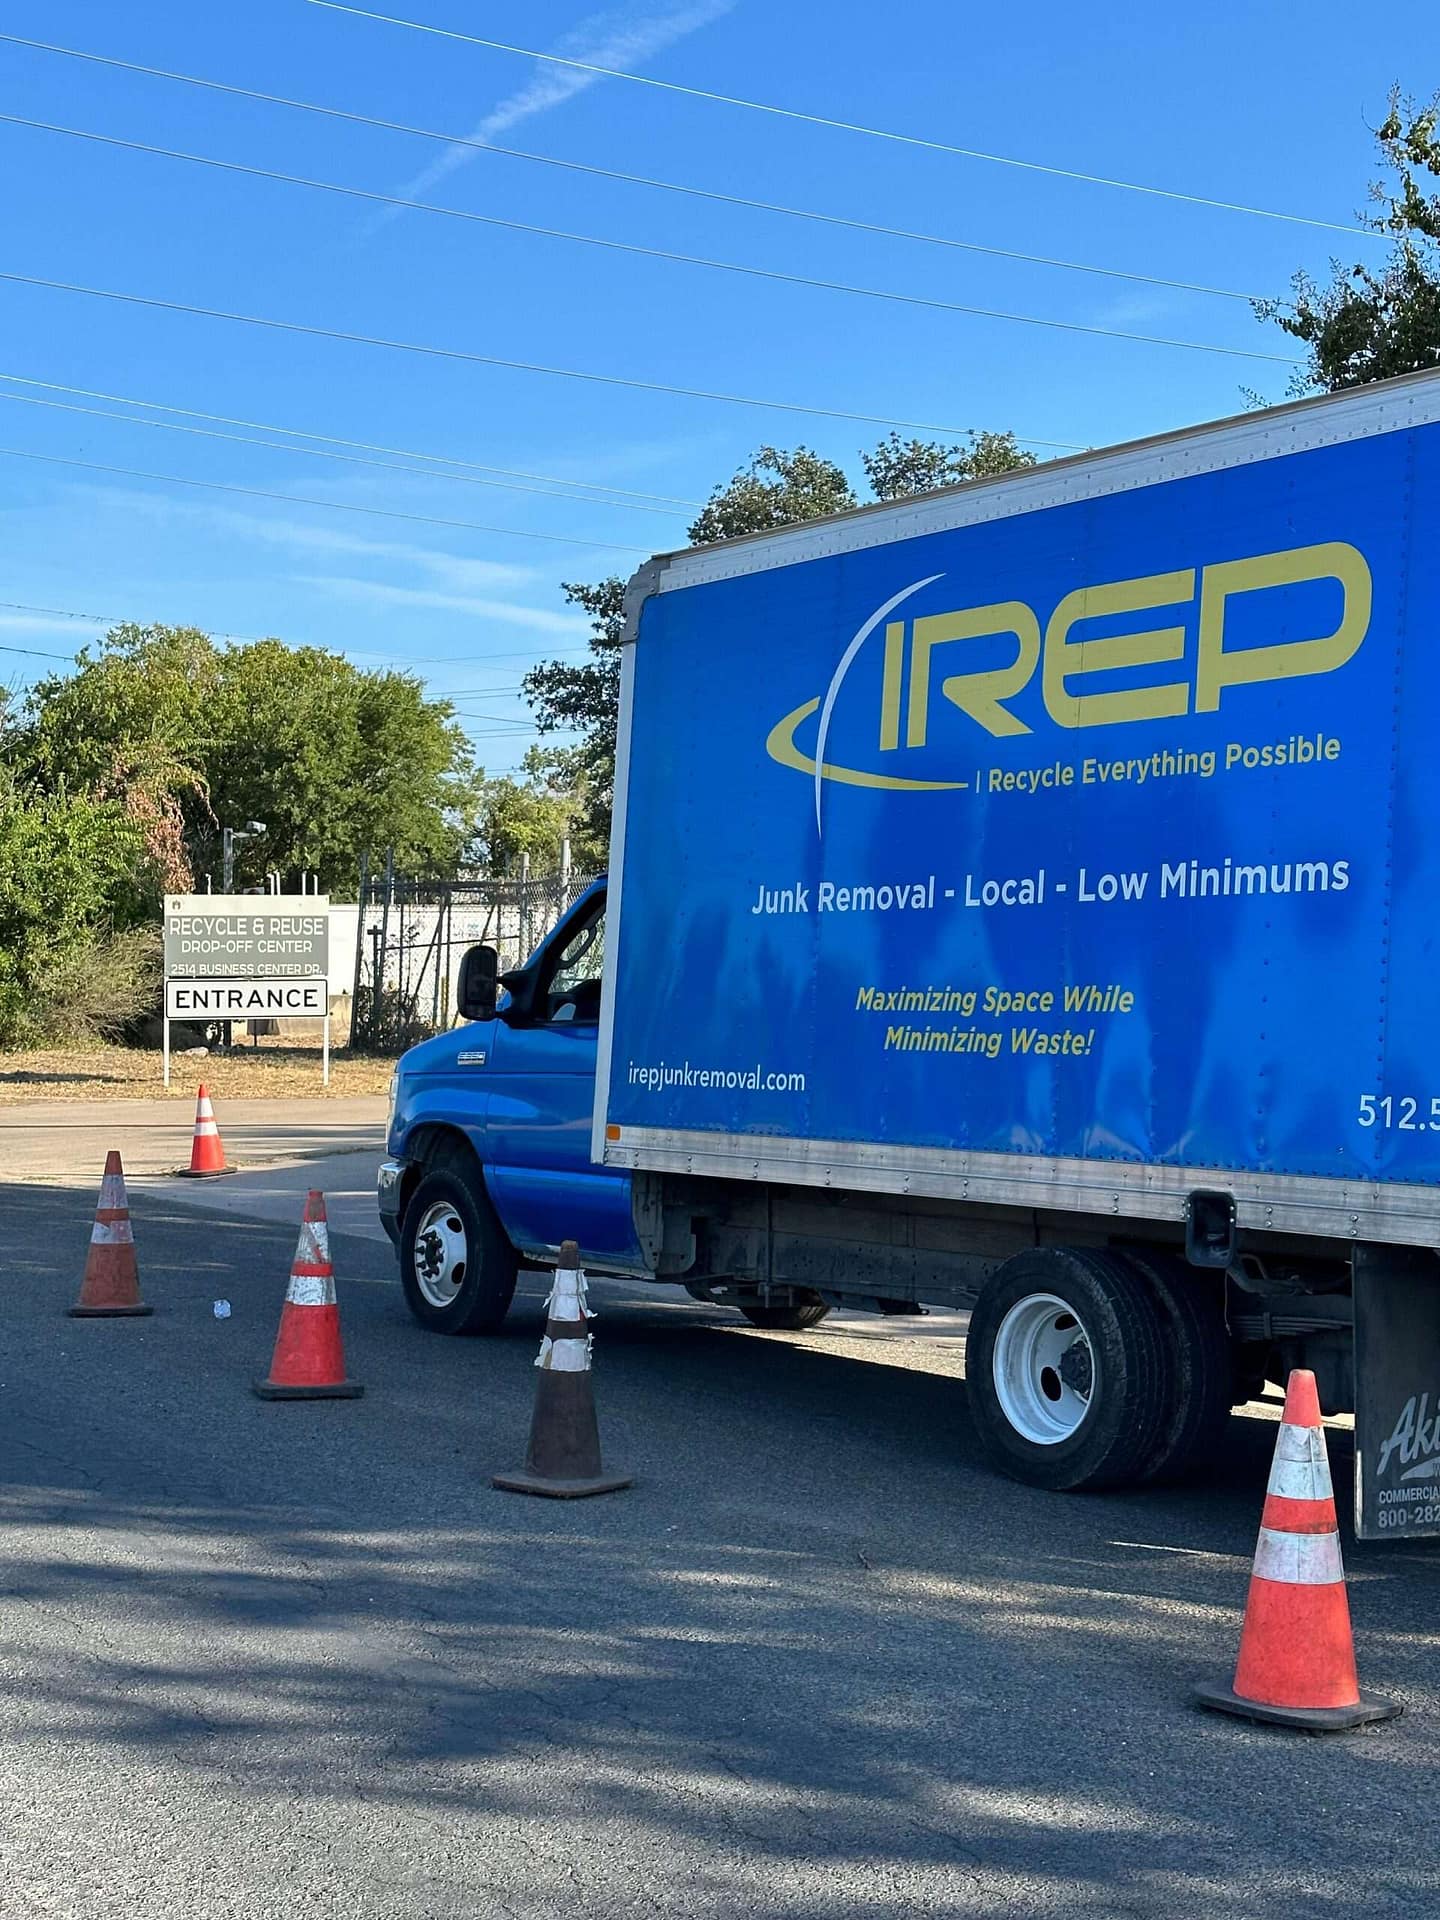 IREP Junk Removal truck waits outside Austin Resource Recovery Recycling and Reuse drop-off center in Austin, TX to help fulfill junk removal company mission